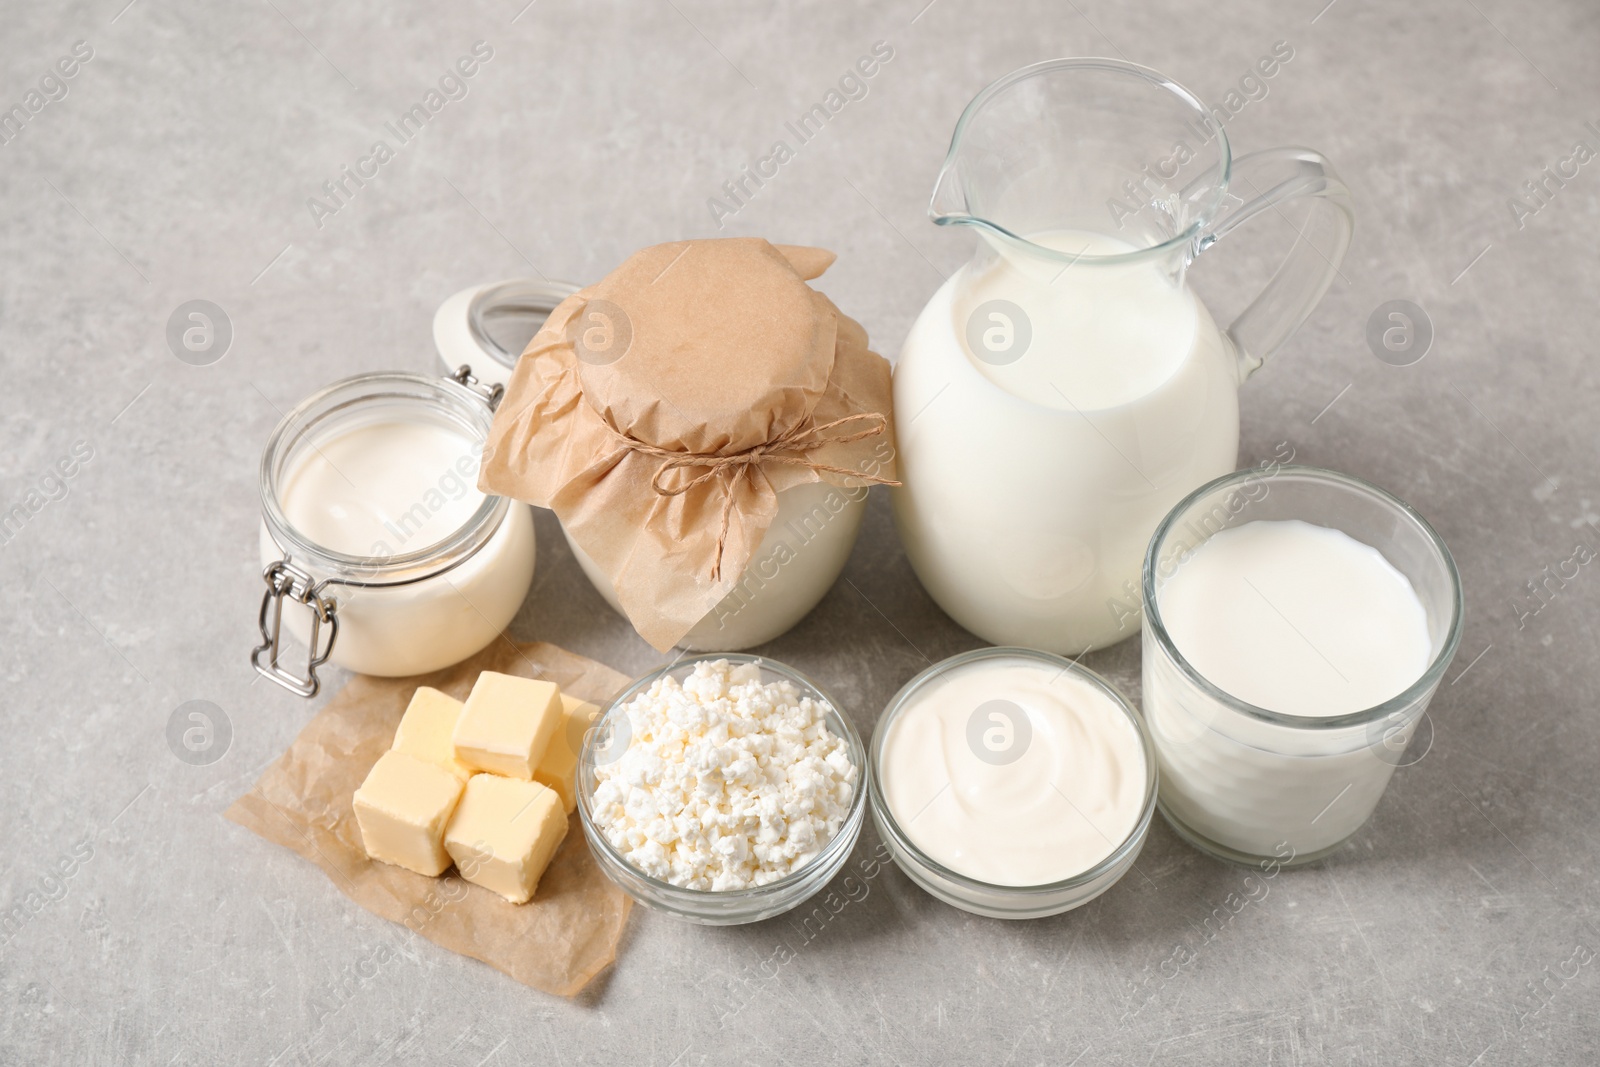 Photo of Different delicious dairy products on light table